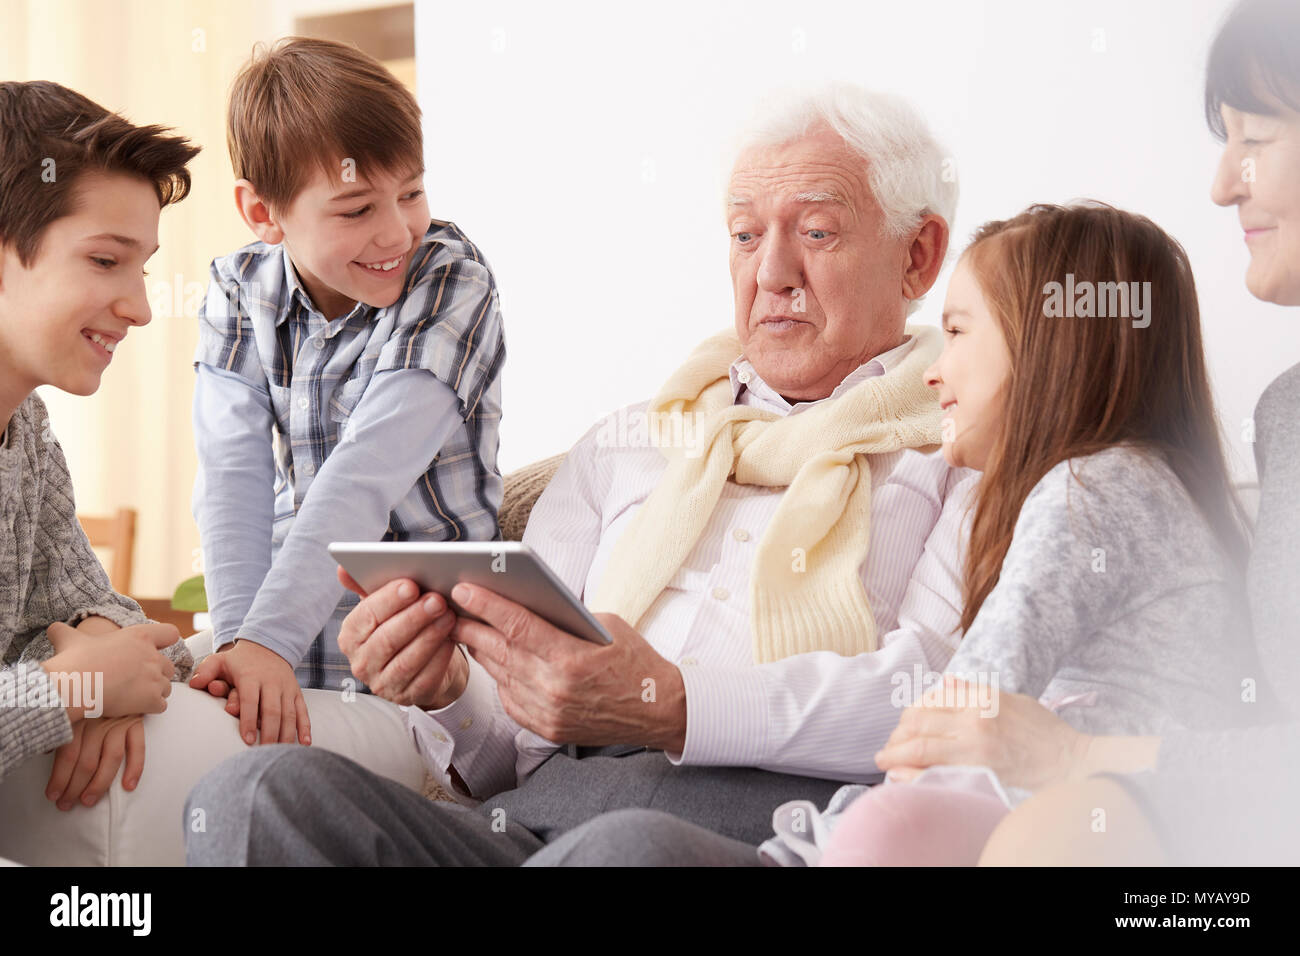 Happy children looking at their surprised grandpa holding a tablet Stock Photo